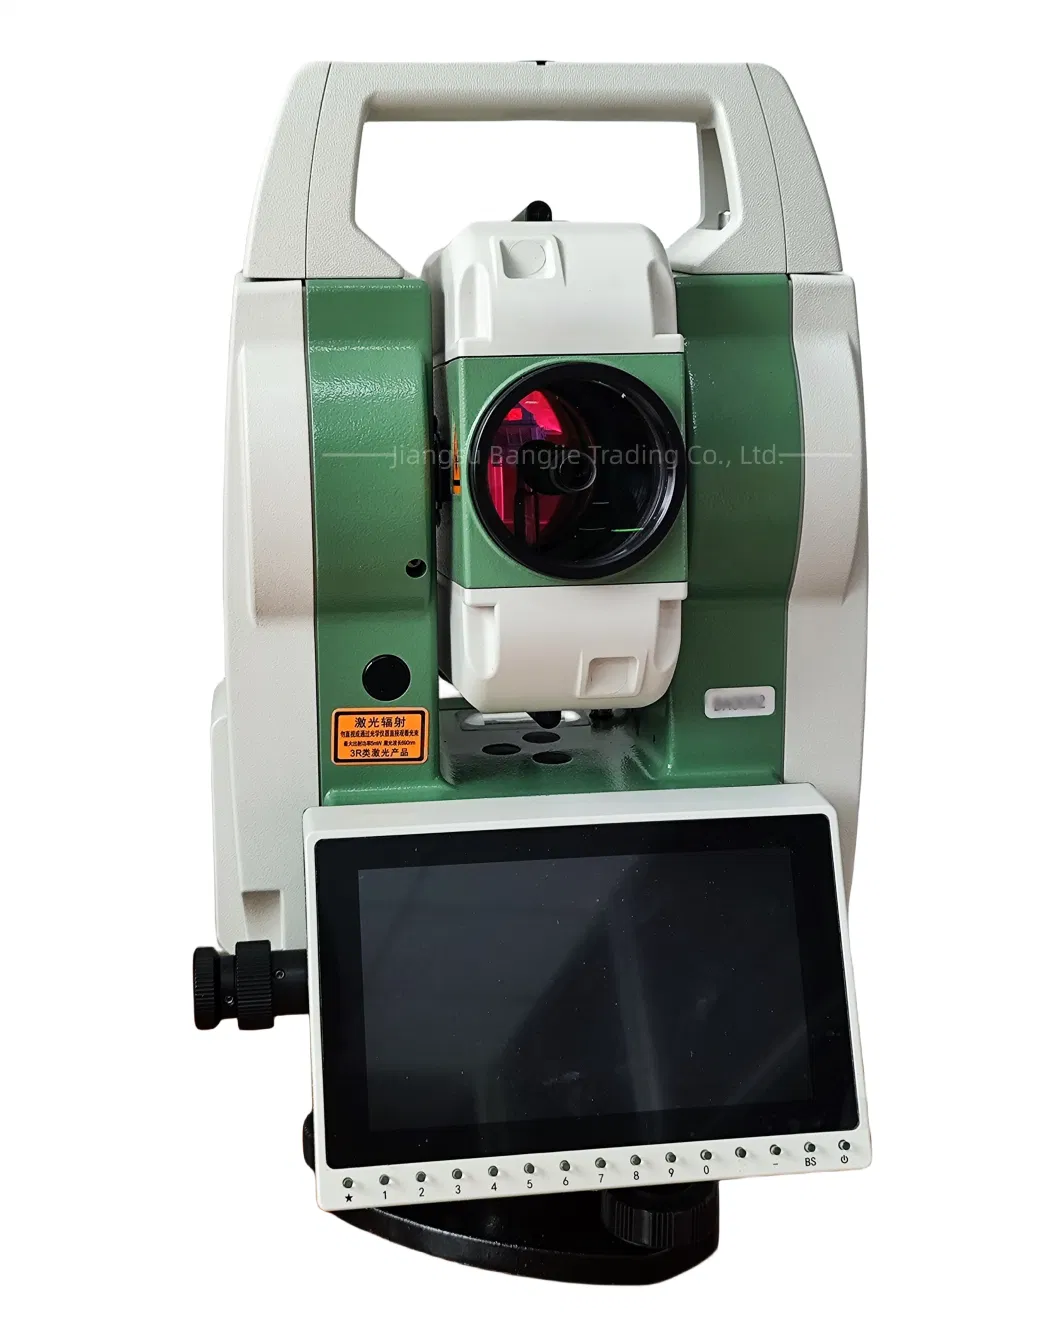 Latest Long Range Foif Rts362n Total Station with HD Color Touch Screen